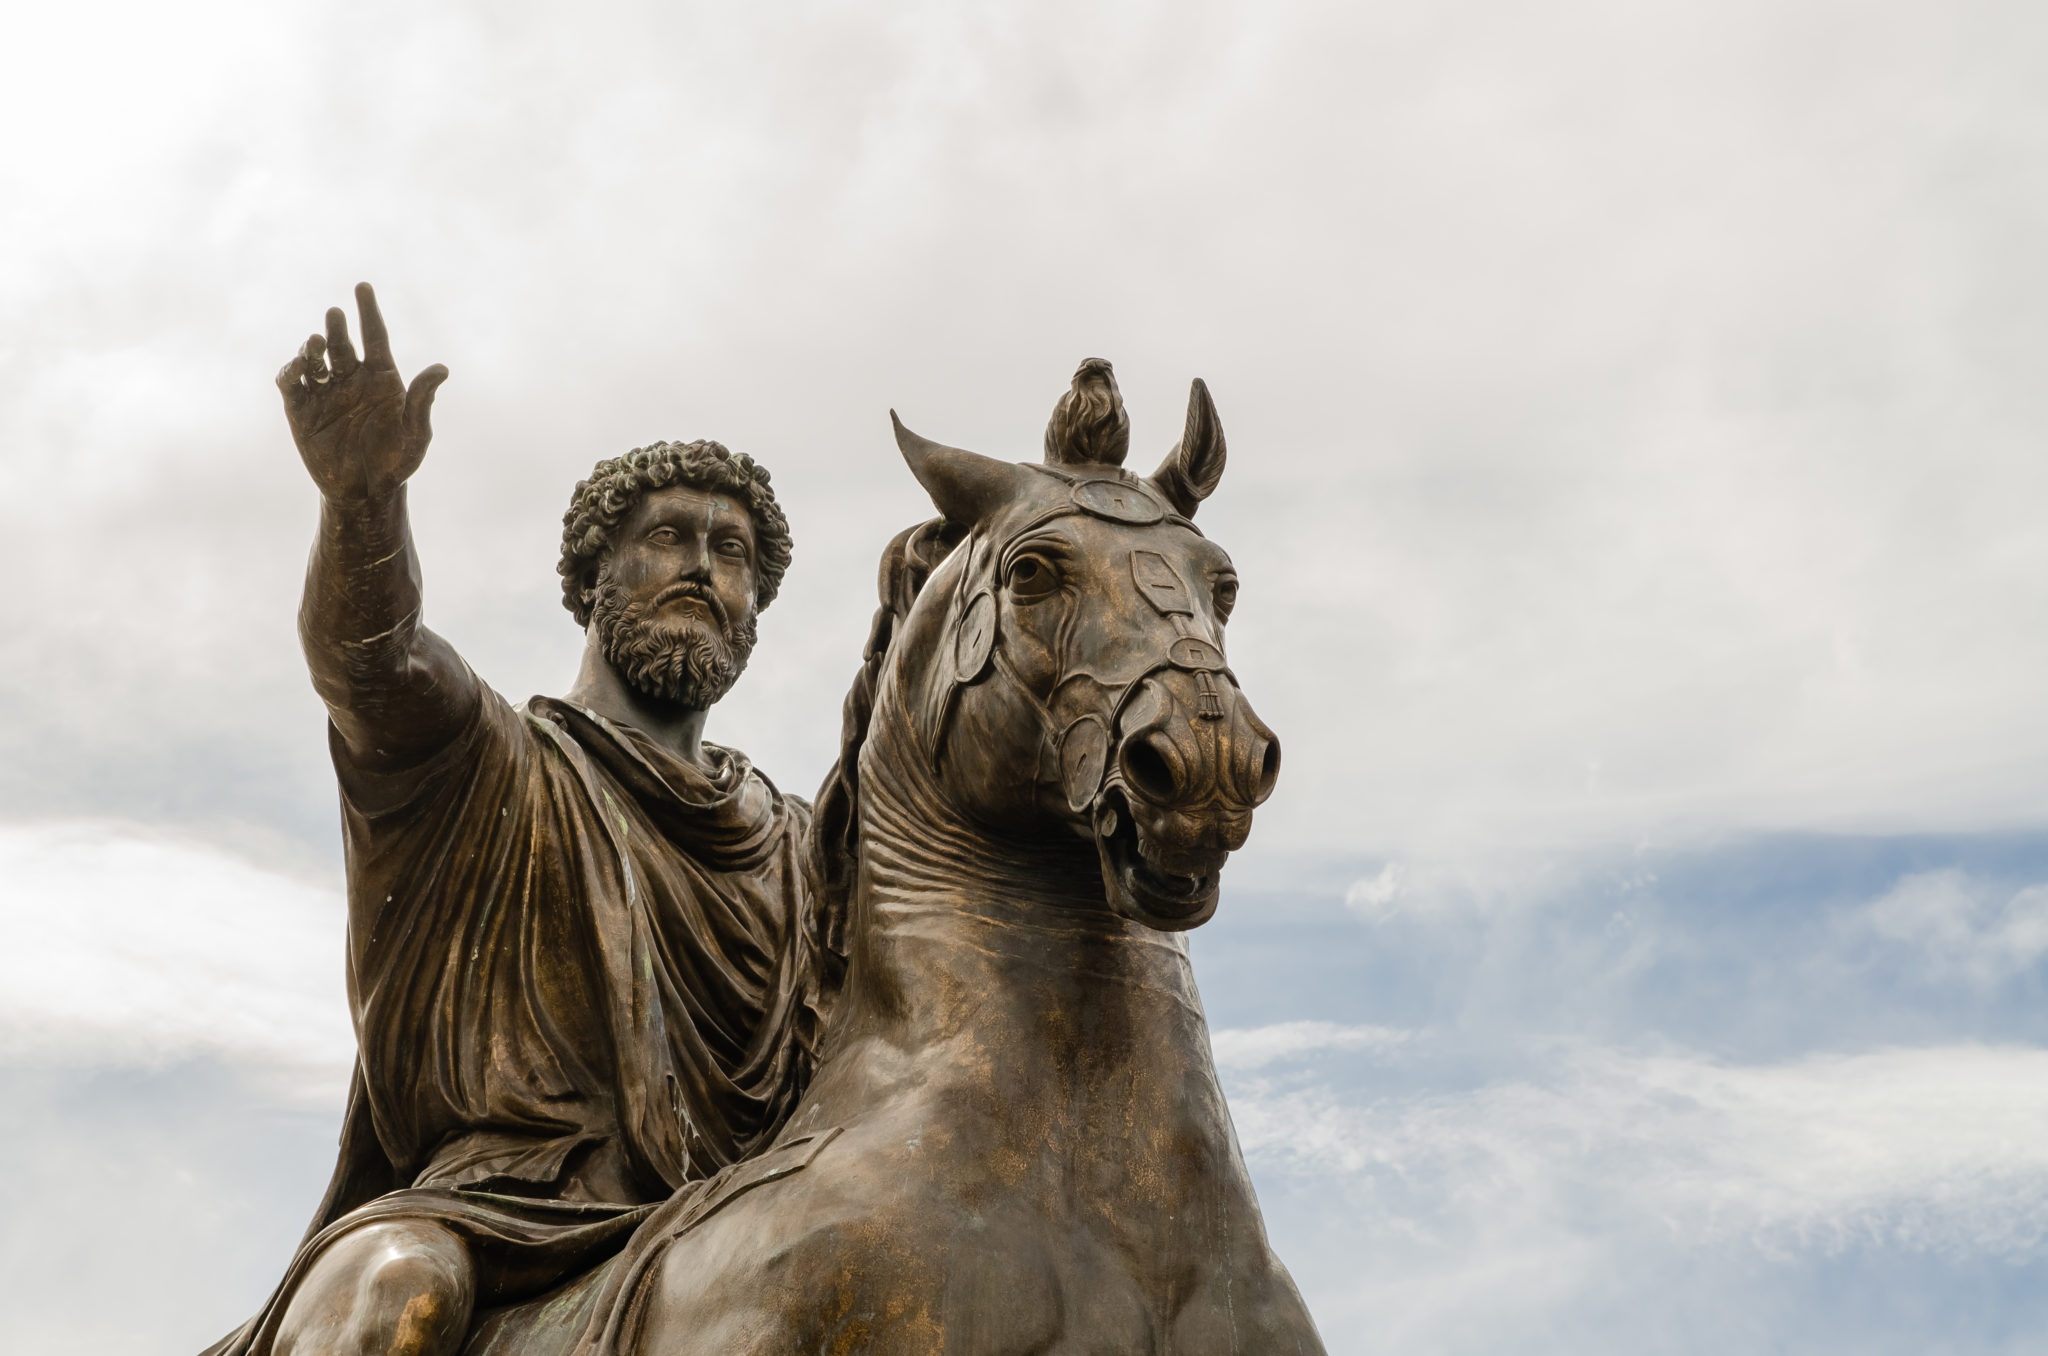 Who Is Marcus Aurelius? Getting To Know The Roman Emperor